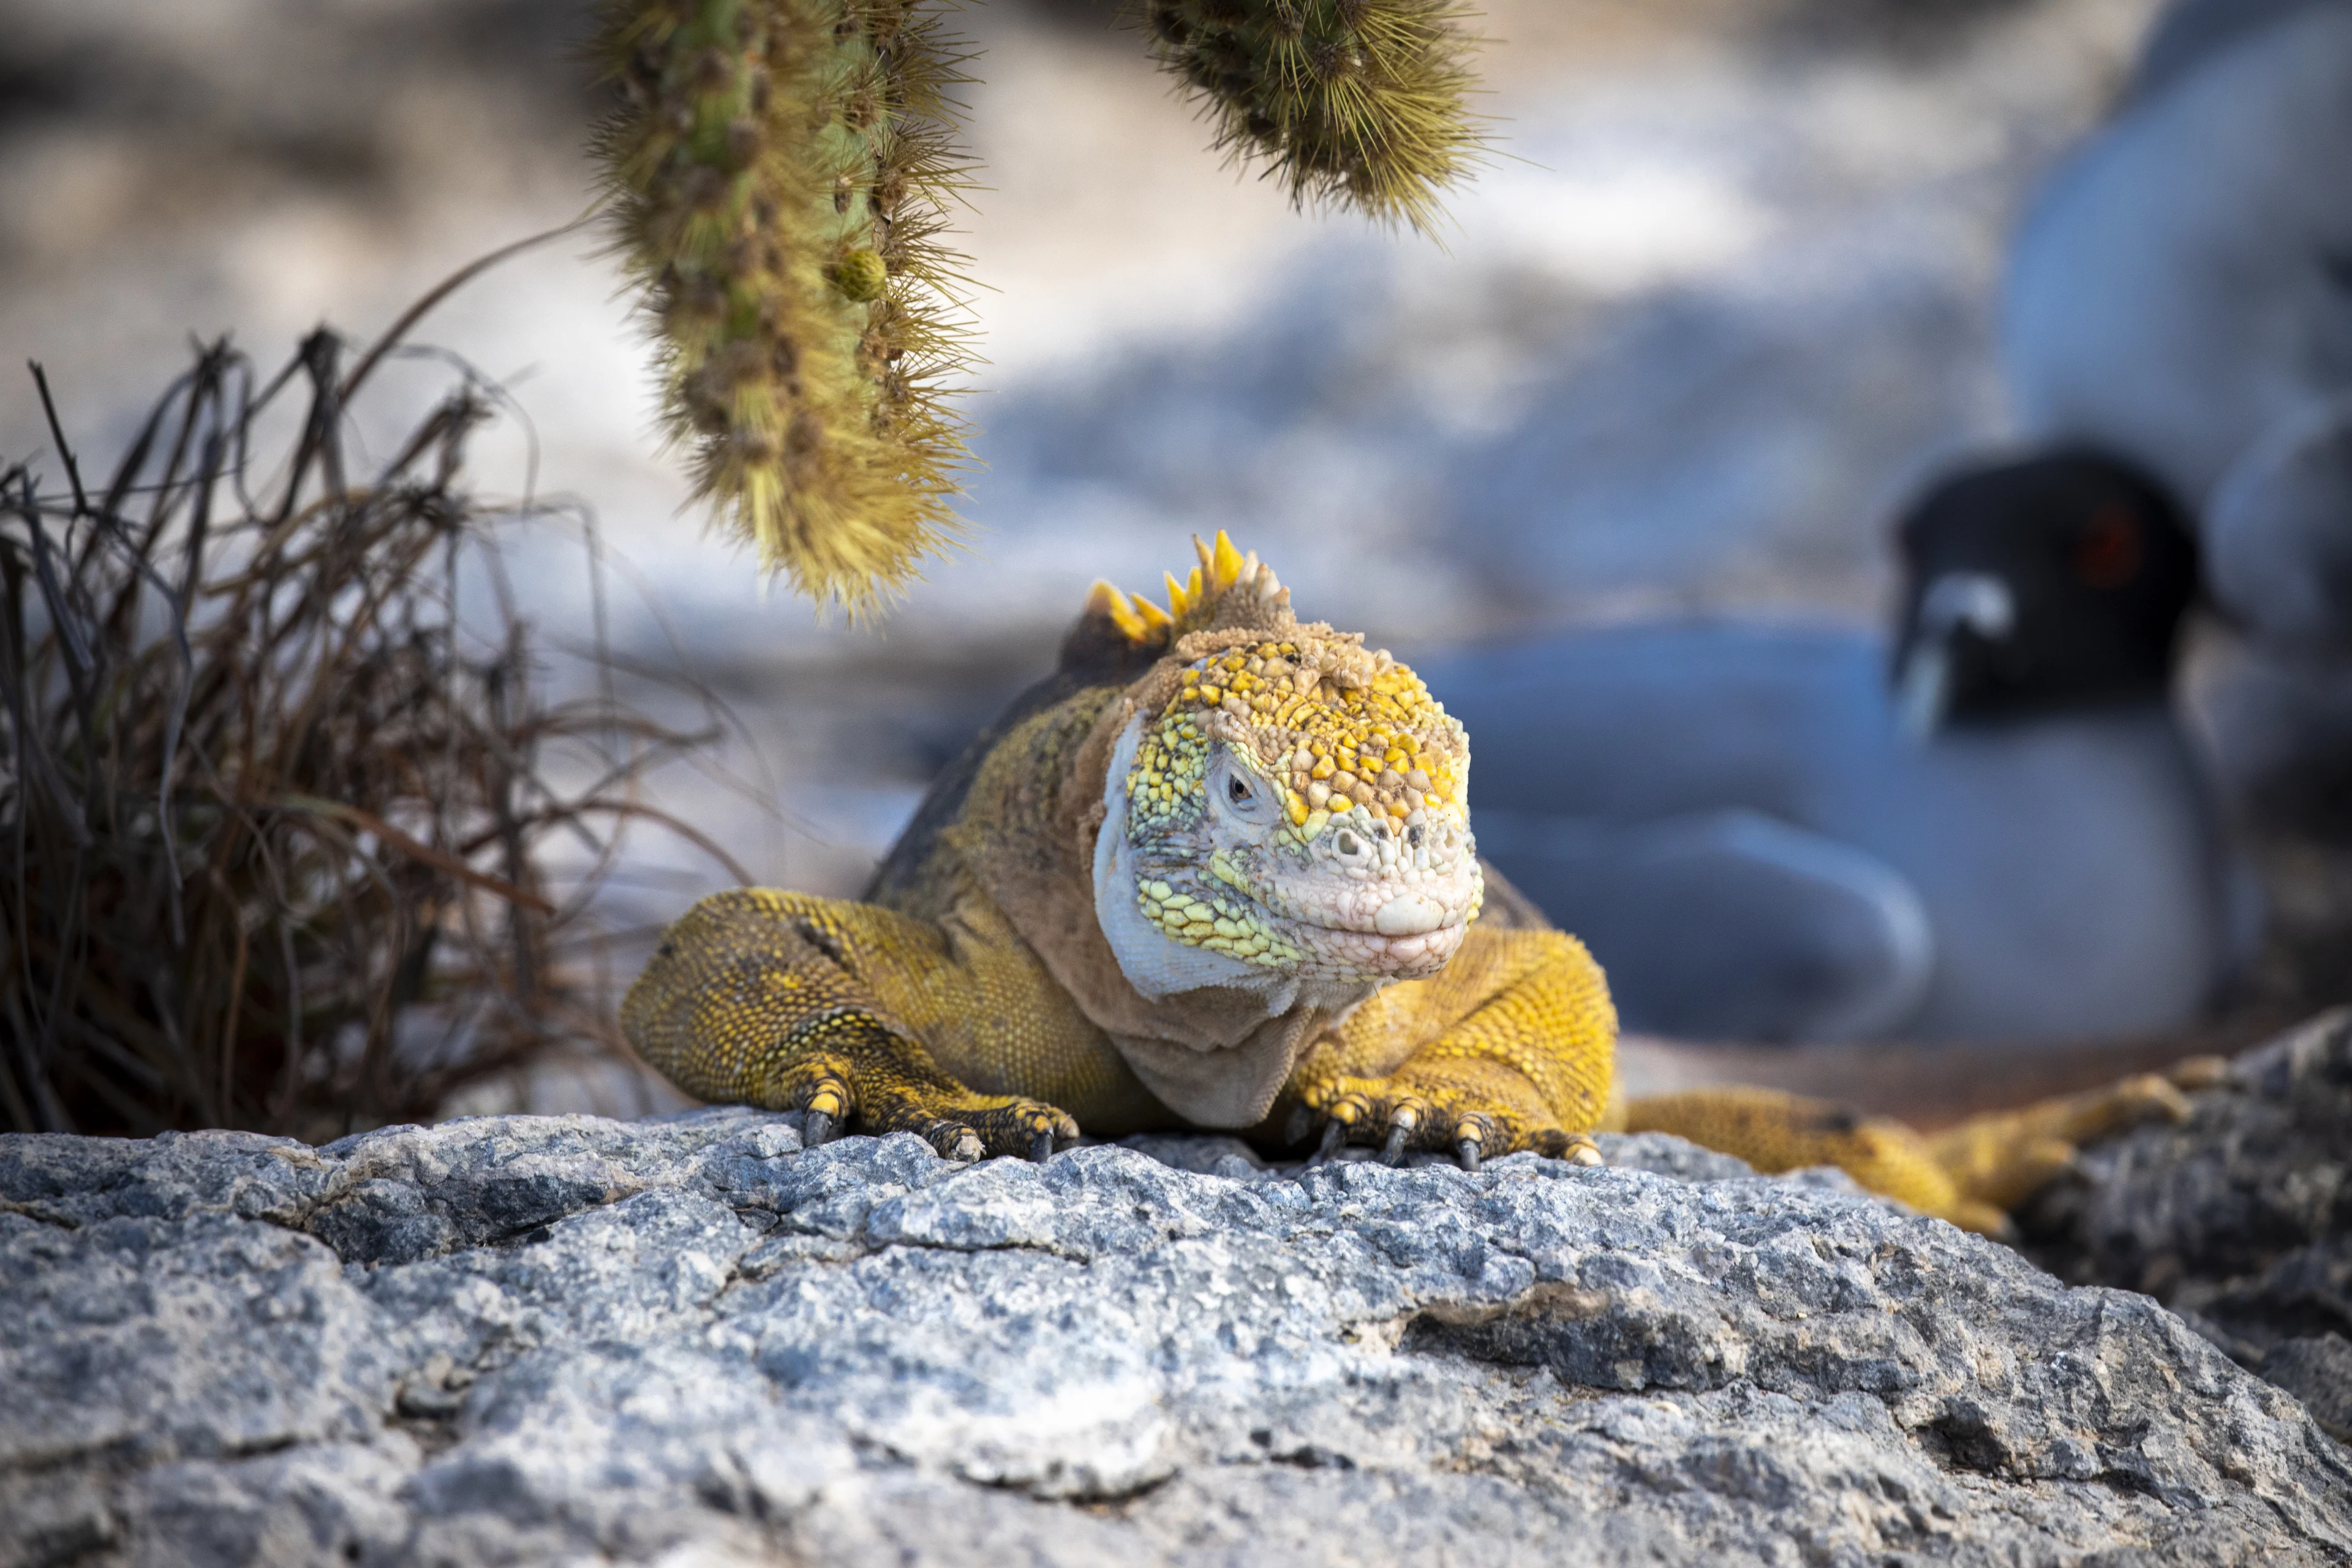 South Plaza is the iguana island. This is the only place at Galapagos where Land iguanas share territory with marine iguanas. Photo: Ashton Ray Hansen